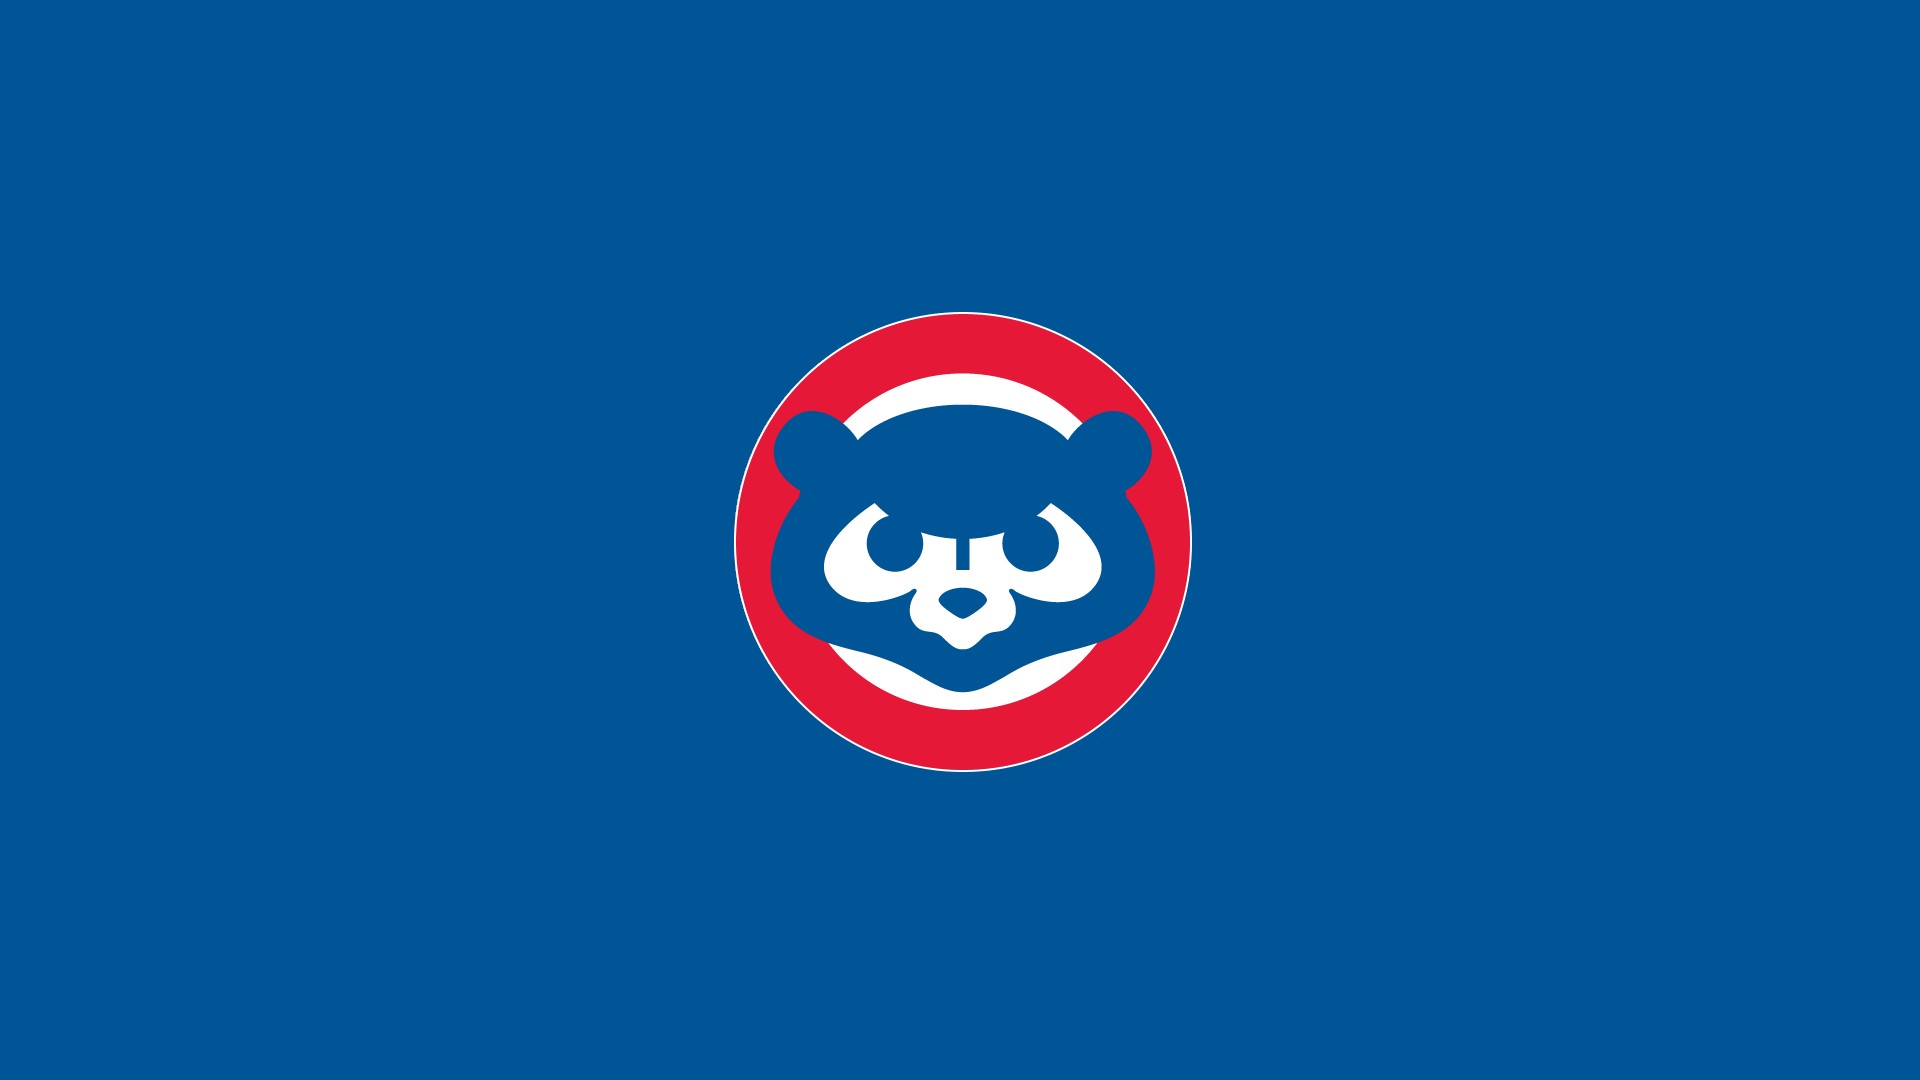 Chicago Cubs Wallpaper HD With high-resolution 1920X1080 pixel. You can use this wallpaper for Mac Desktop Wallpaper, Laptop Screensavers, Android Wallpapers, Tablet or iPhone Home Screen and another mobile phone device